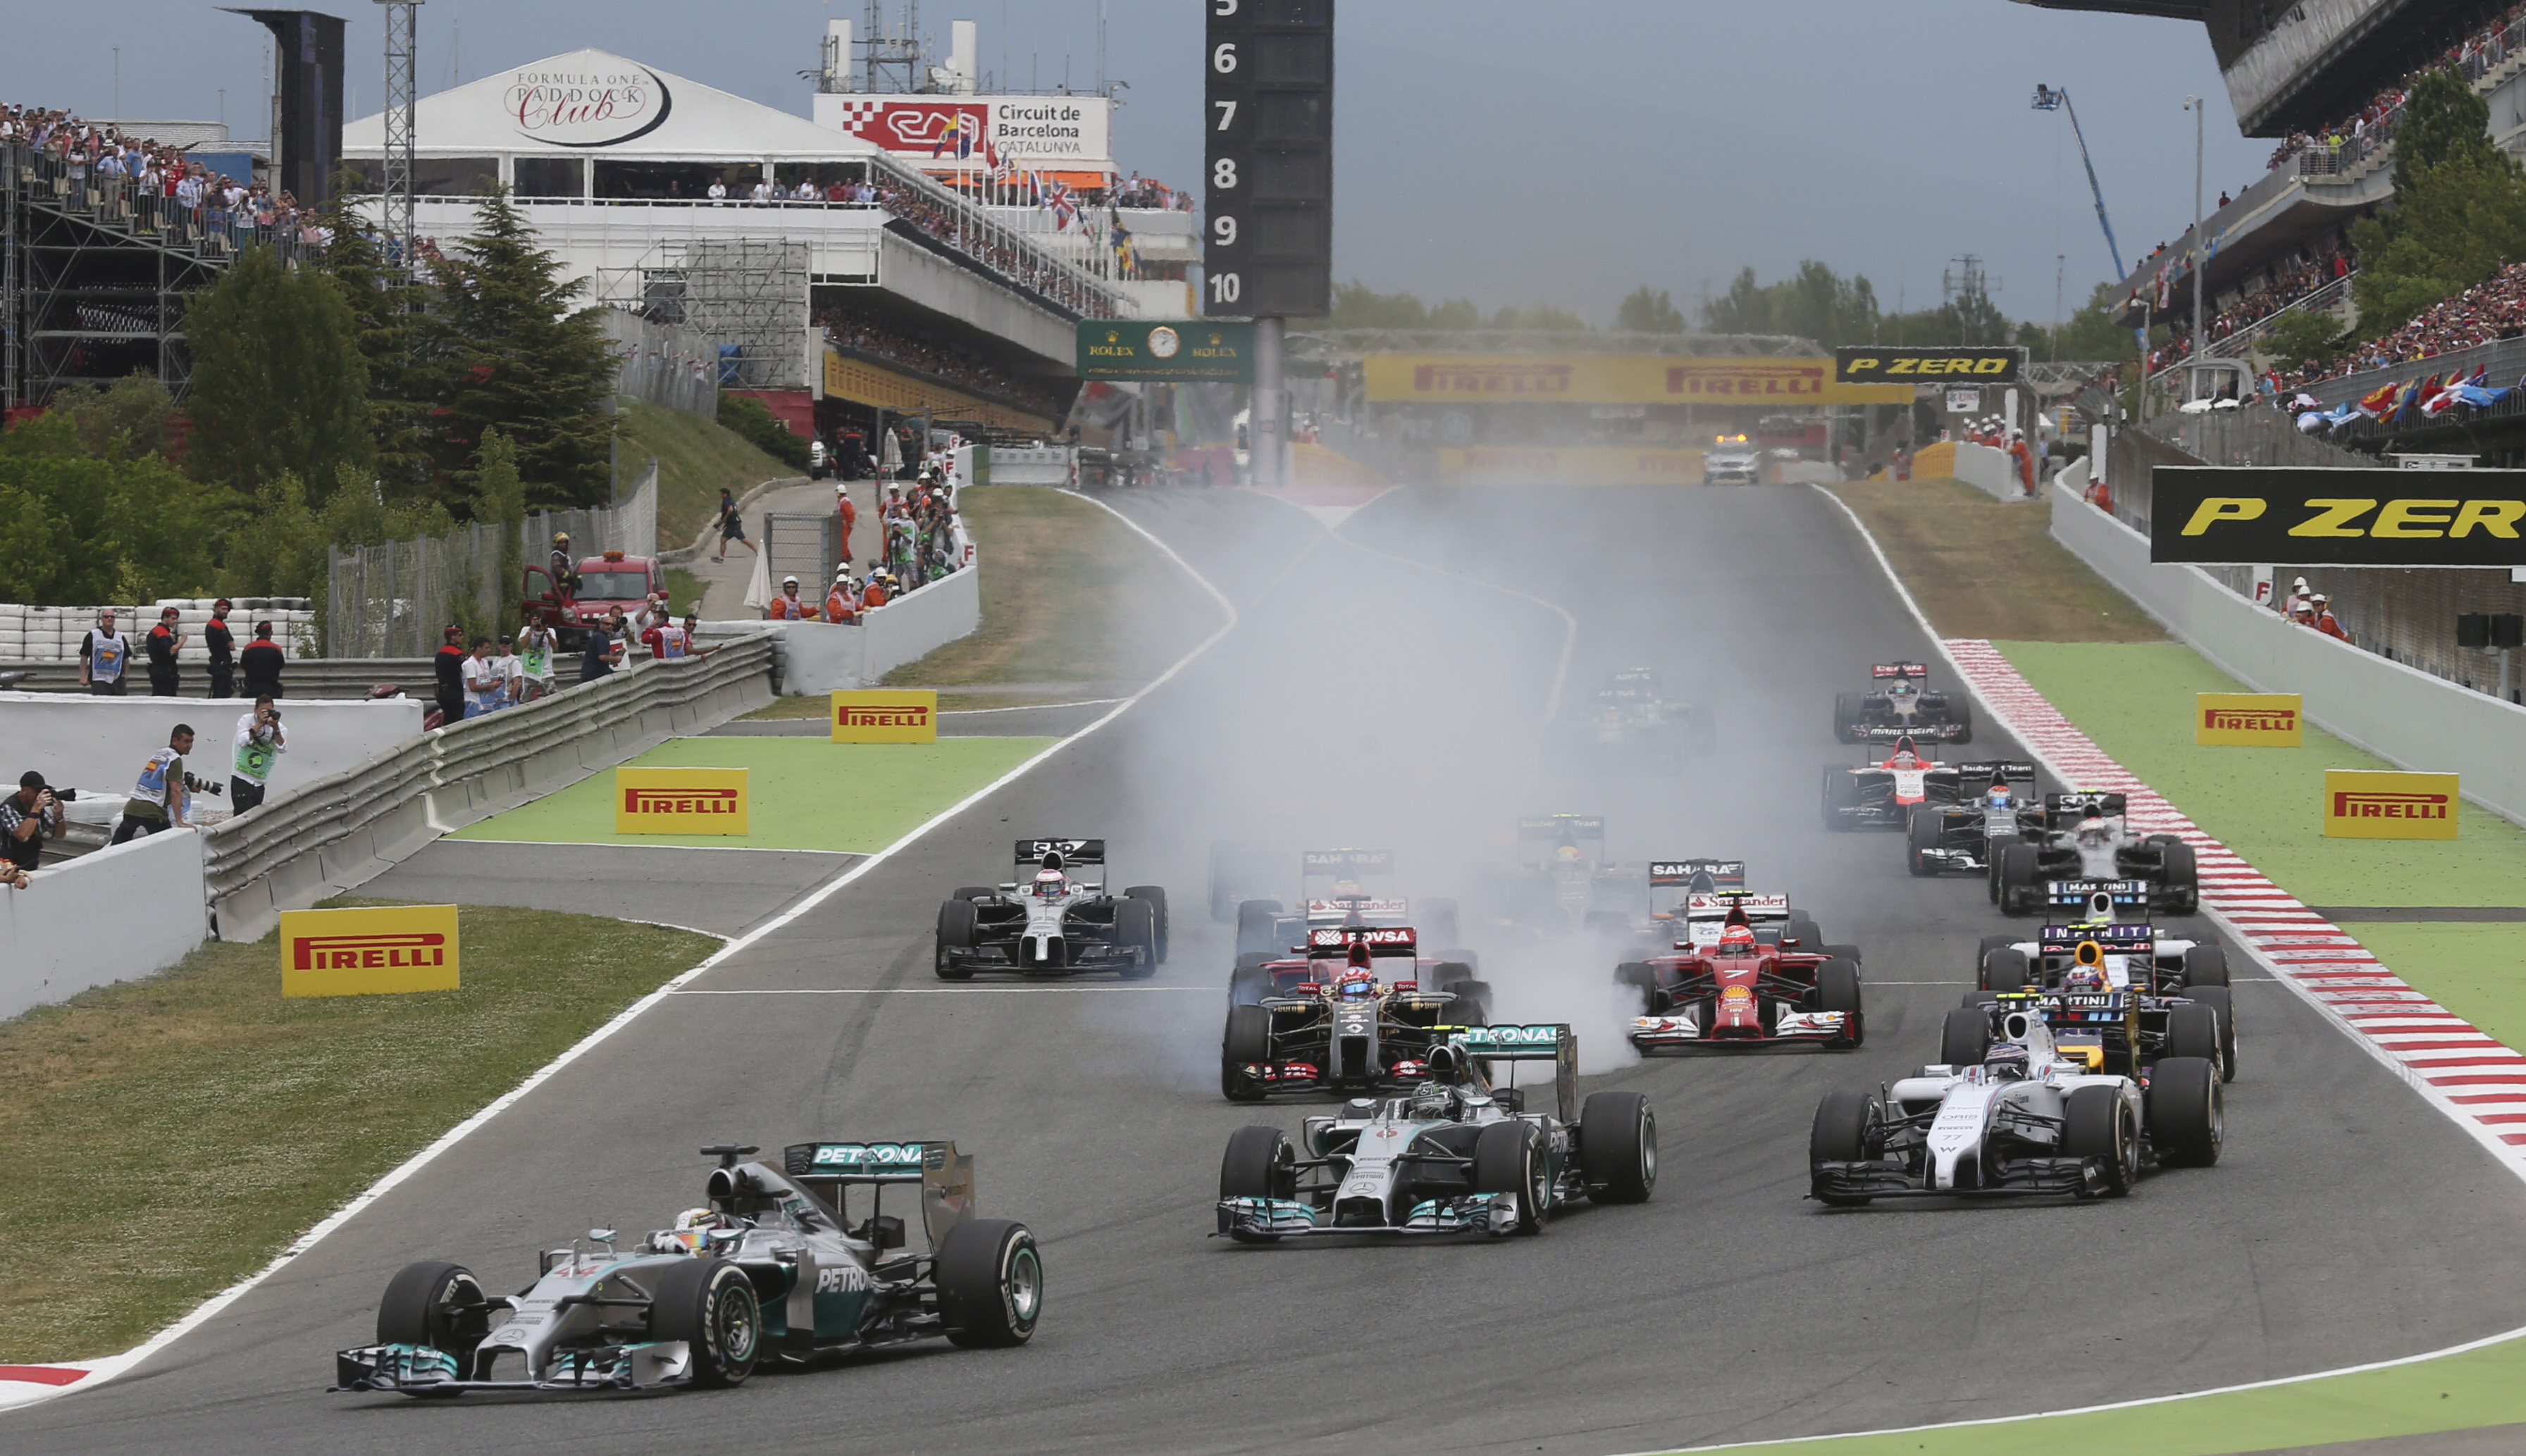 Mercedes driver Lewis Hamilton of Britain  leads the field after the start during the Spain Formula One Grand Prix at the Barcelona Catalunya racetrack in Montmelo, near Barcelona, Spain, Sunday, May 11, 2014.(AP Photo/Luca Bruno)